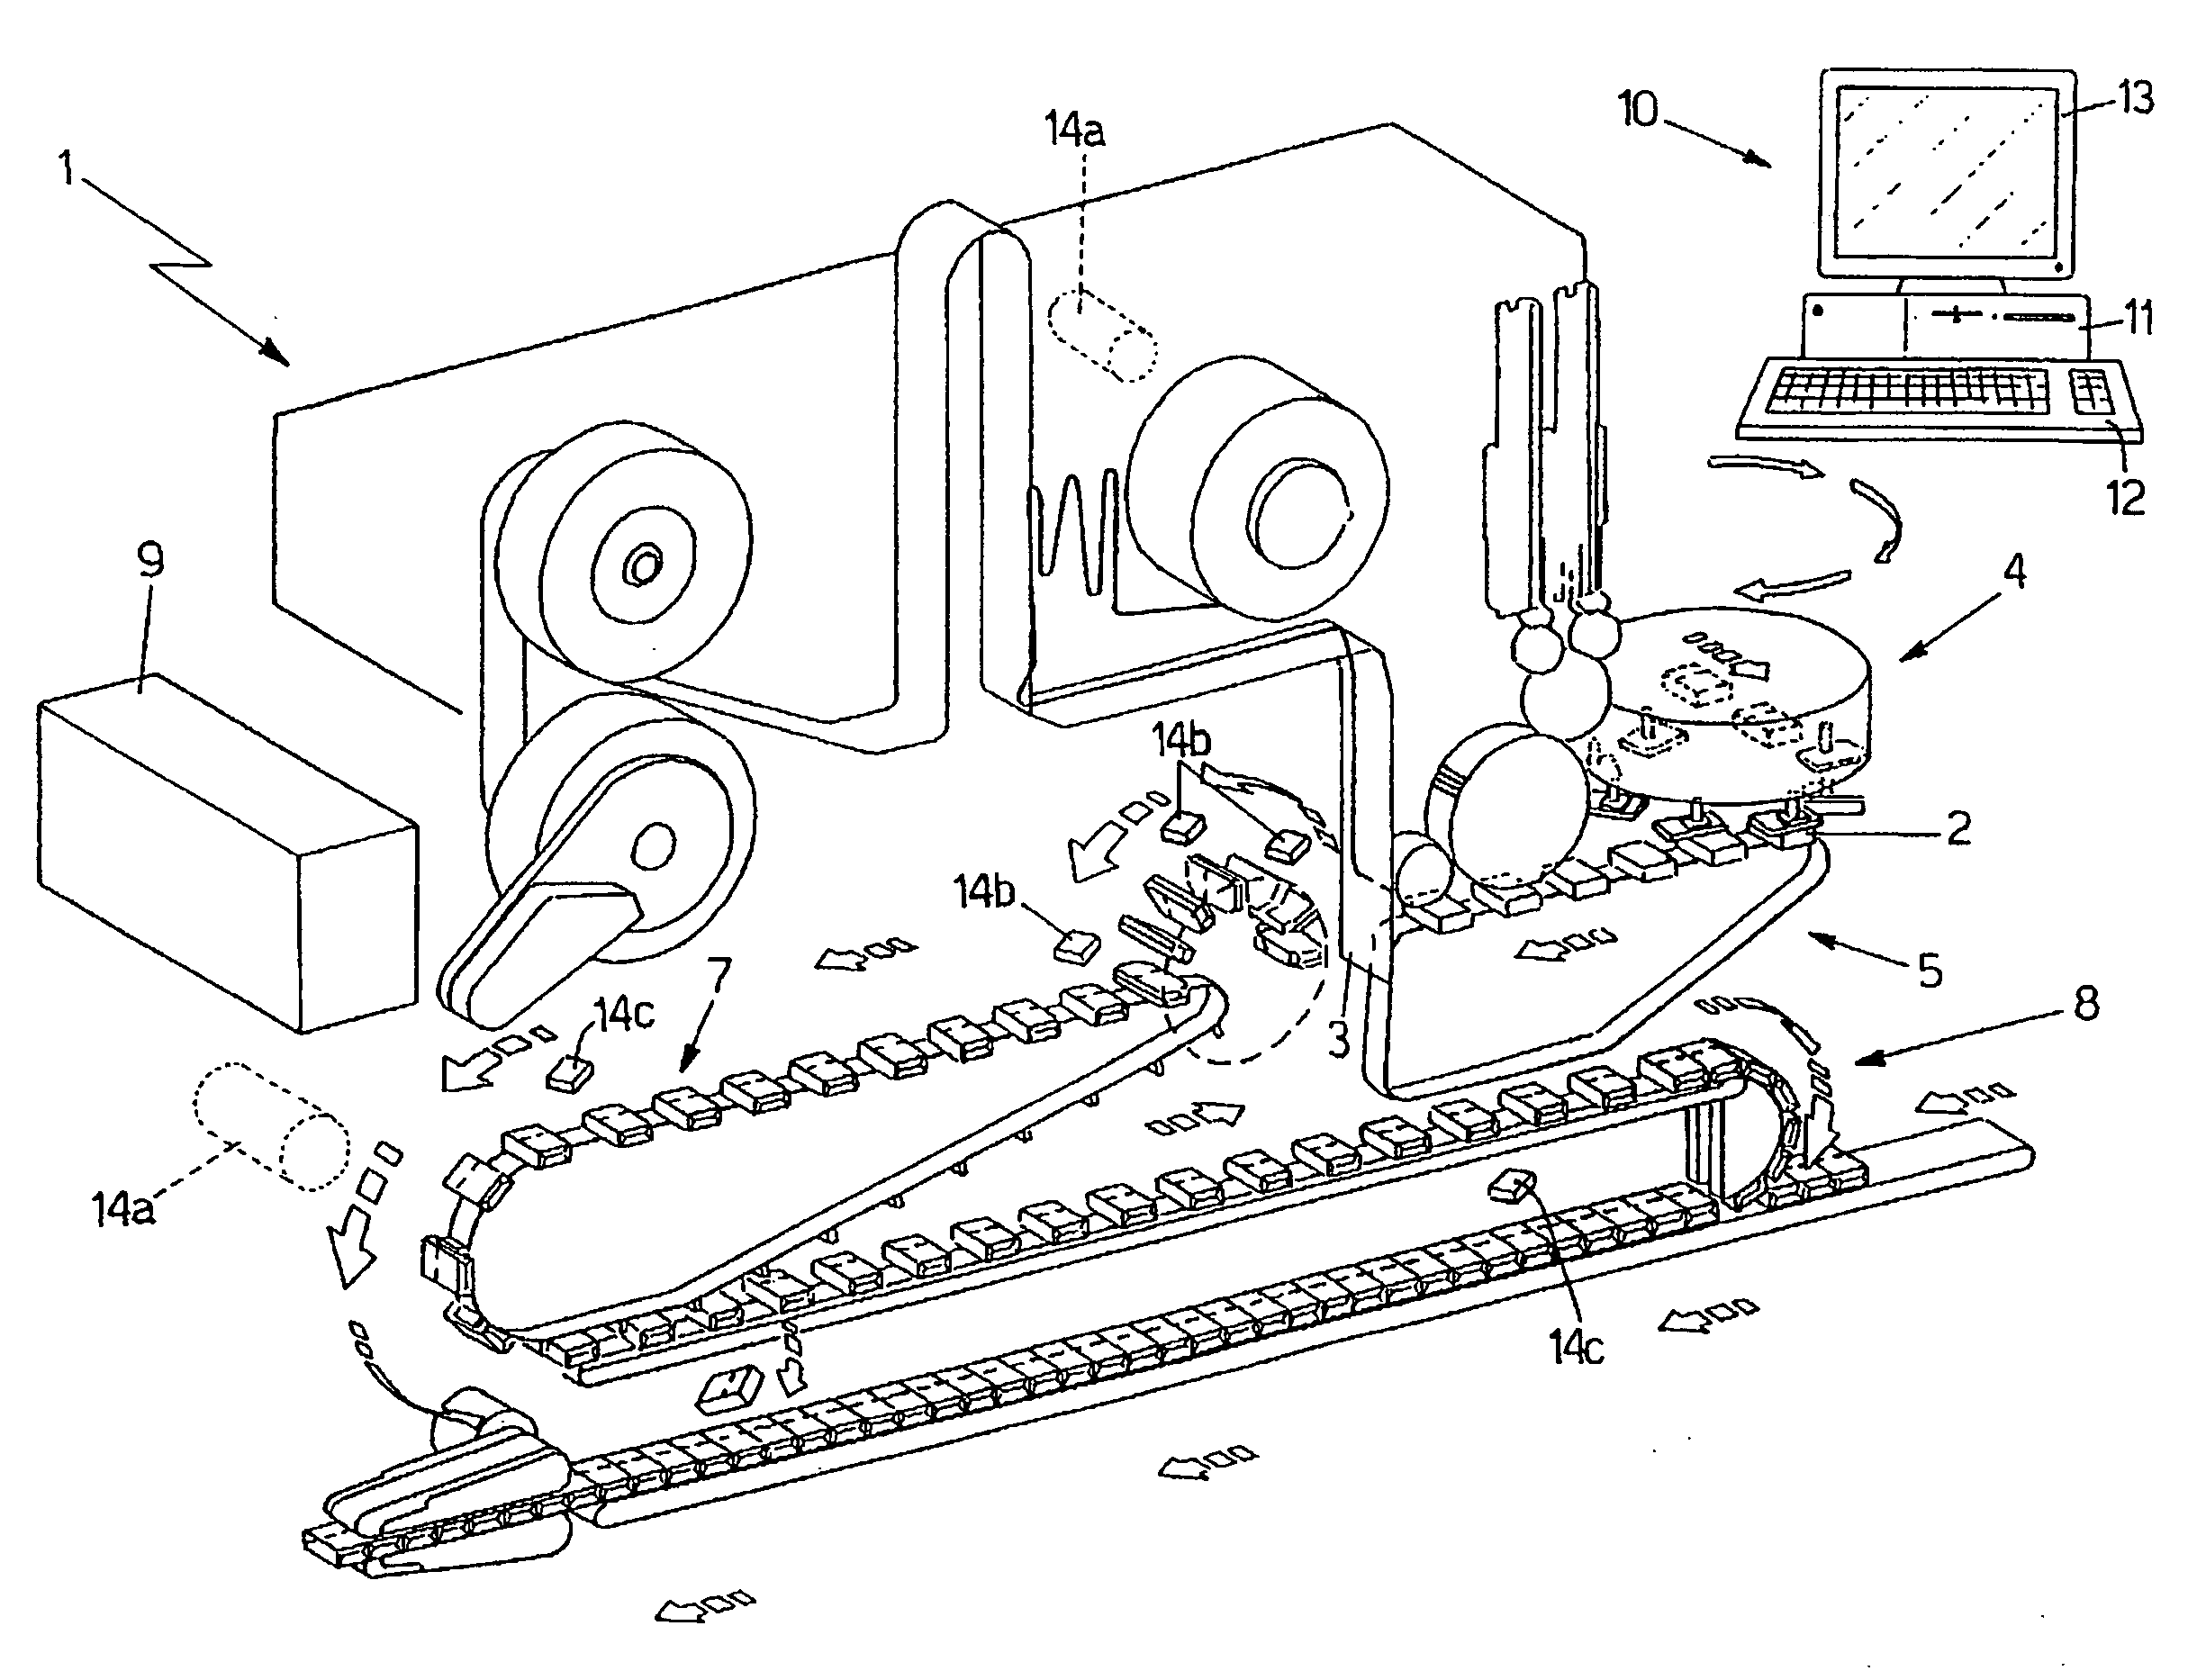 Method of controlling an automatic production/packing machine